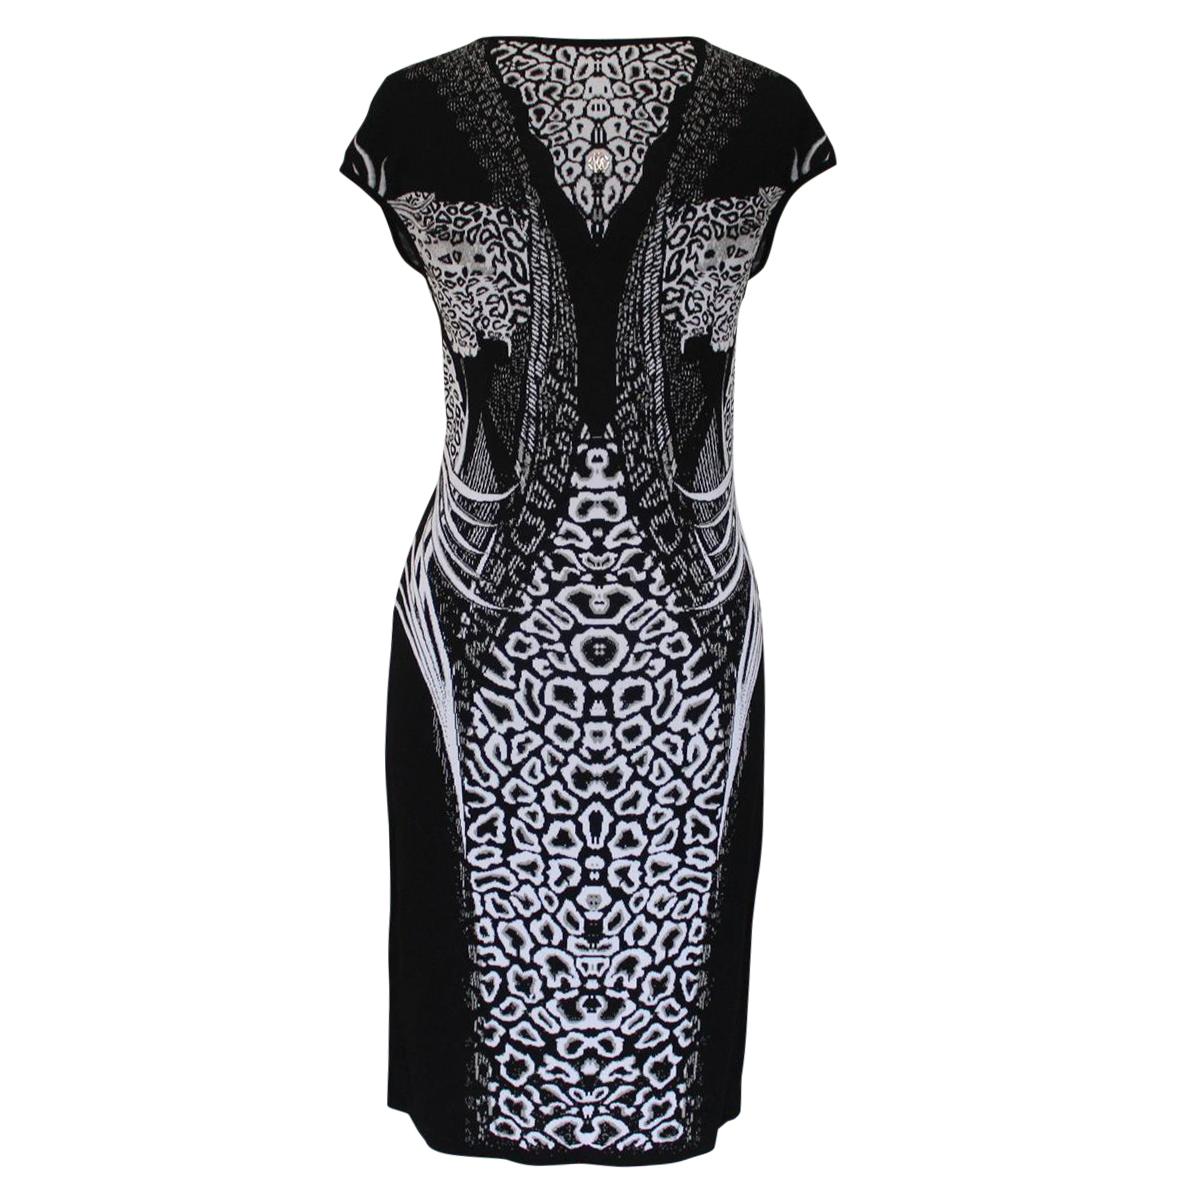 Wonderful style and fit for this Cavalli dress
Viscose 
Fancy print
Black and white
Sleeveless
Total length cm 95 (37.4 inches)
Worldwide express shipping included in the price !